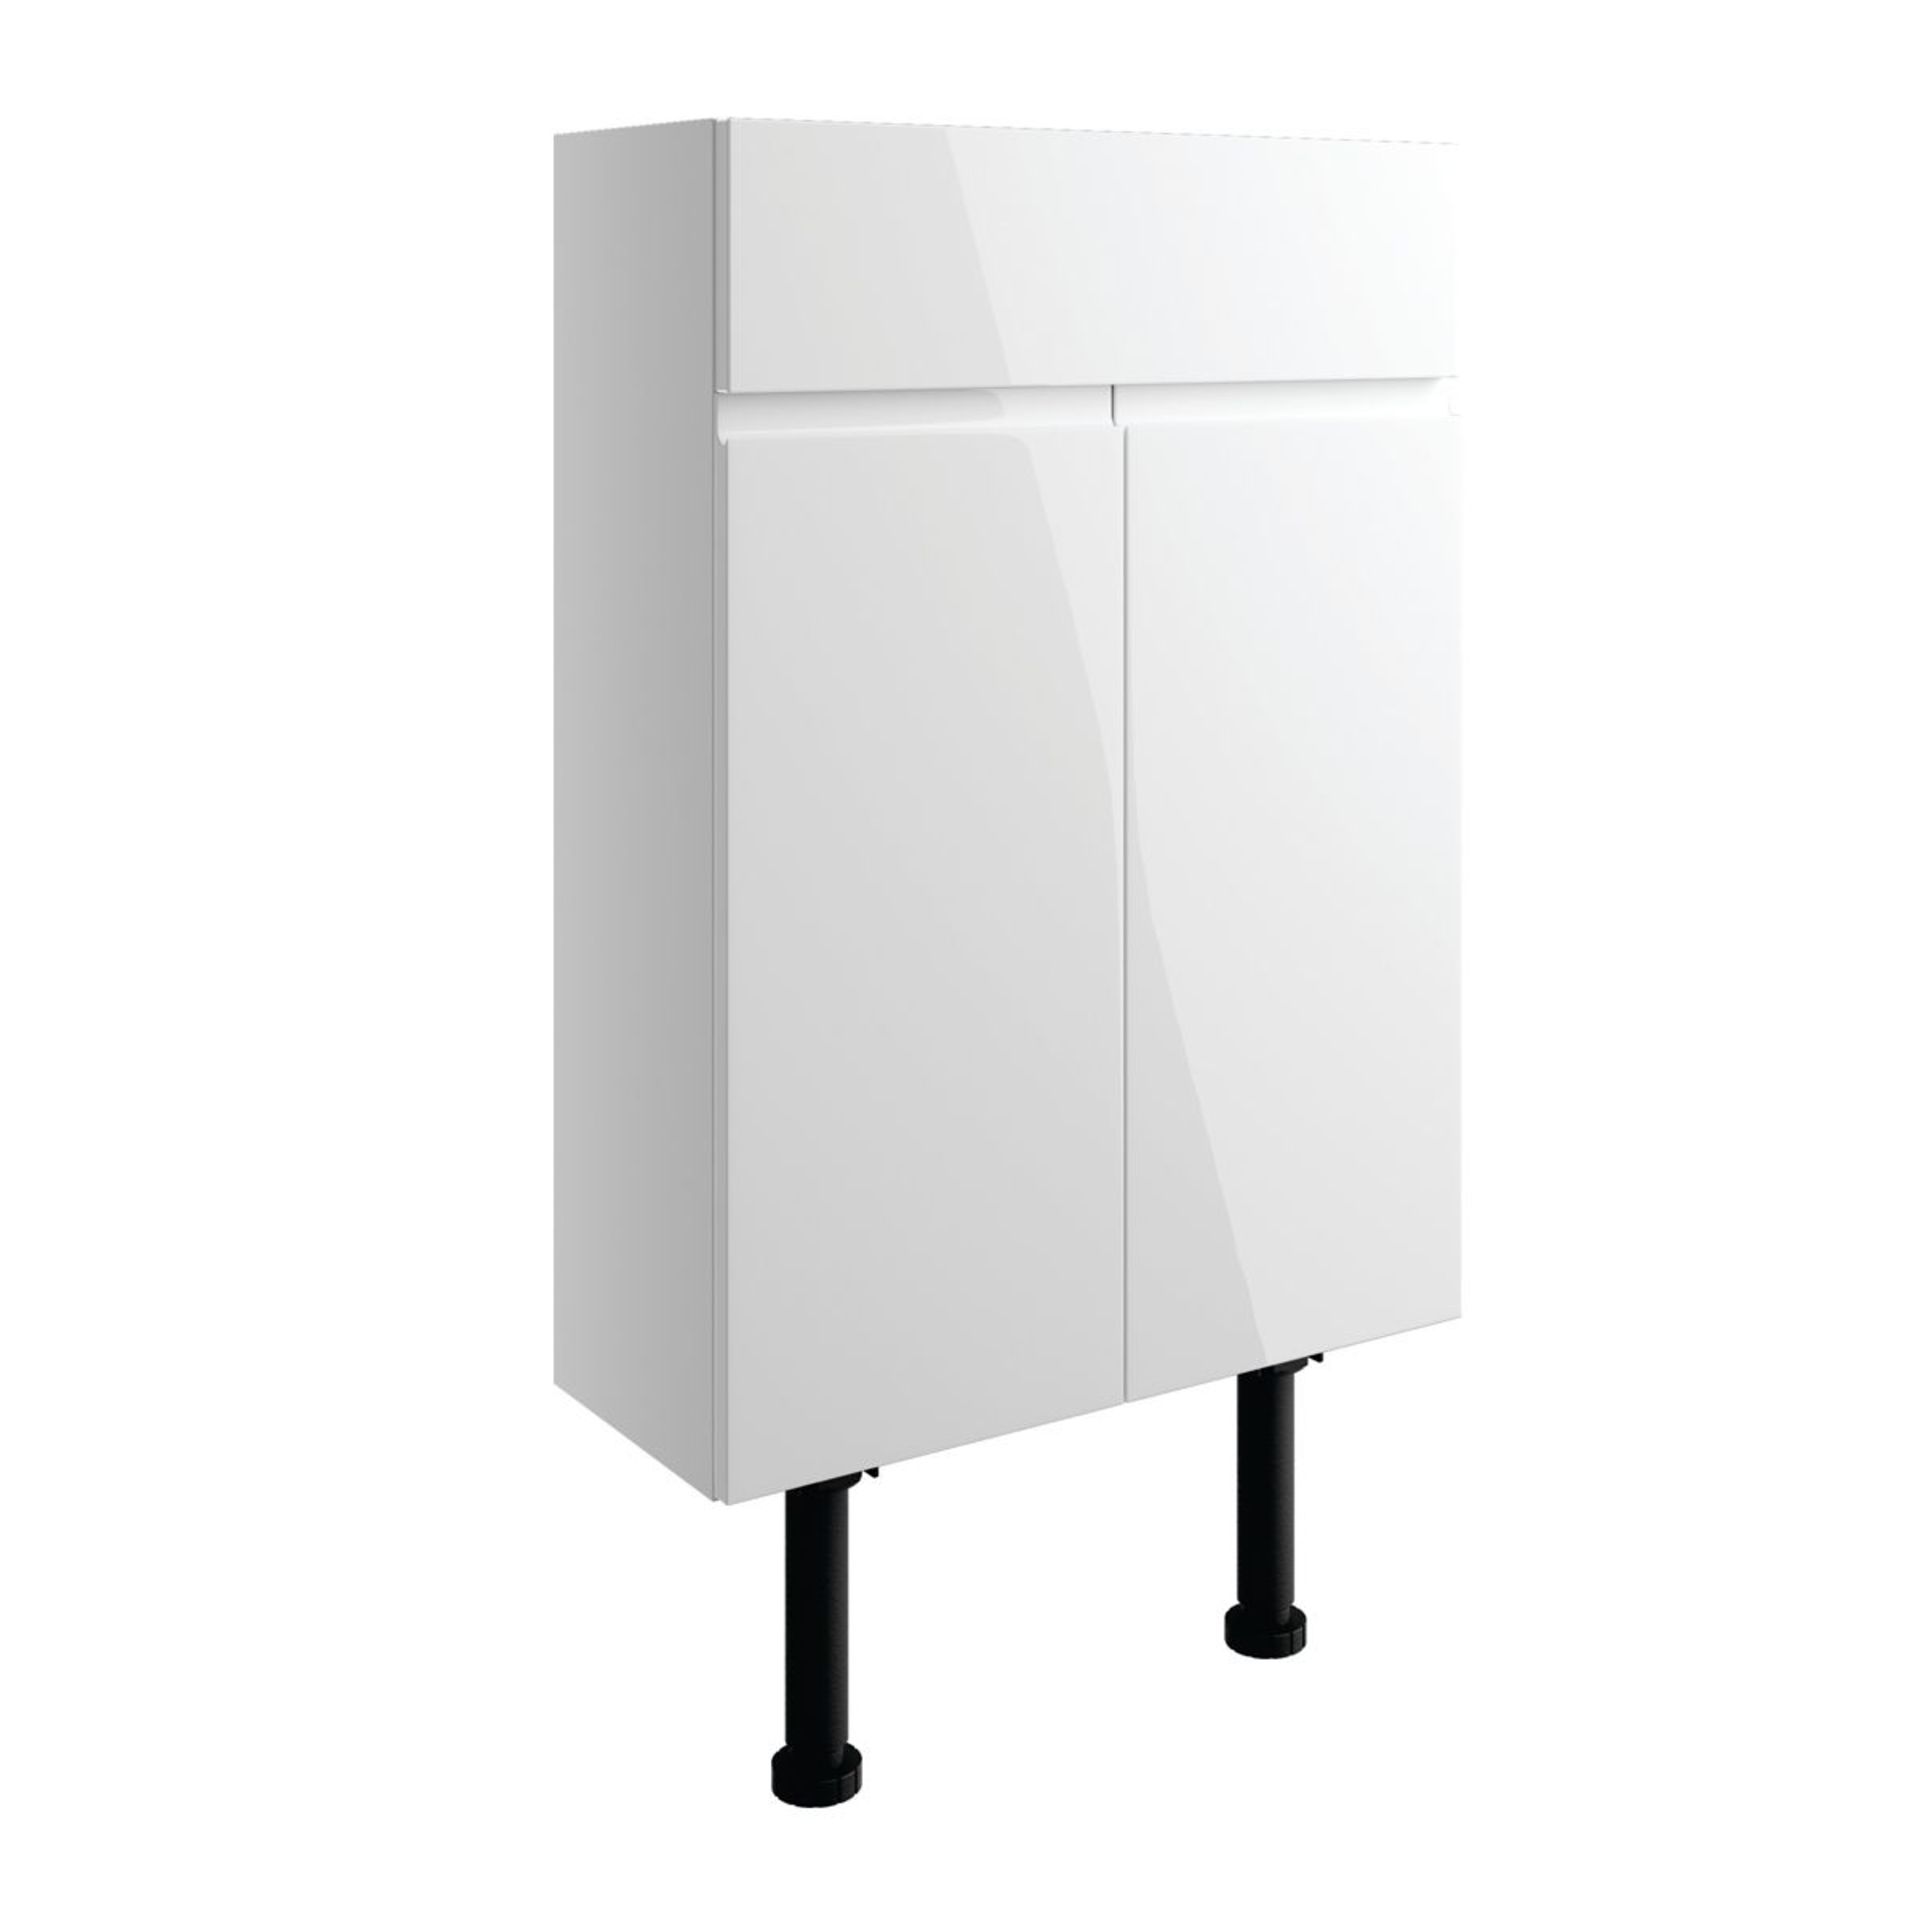 NEW (L101) Valesso White Gloss Vanity Unit 600mm. RRP £305.00. Finished in White Gloss Adju... - Image 2 of 3